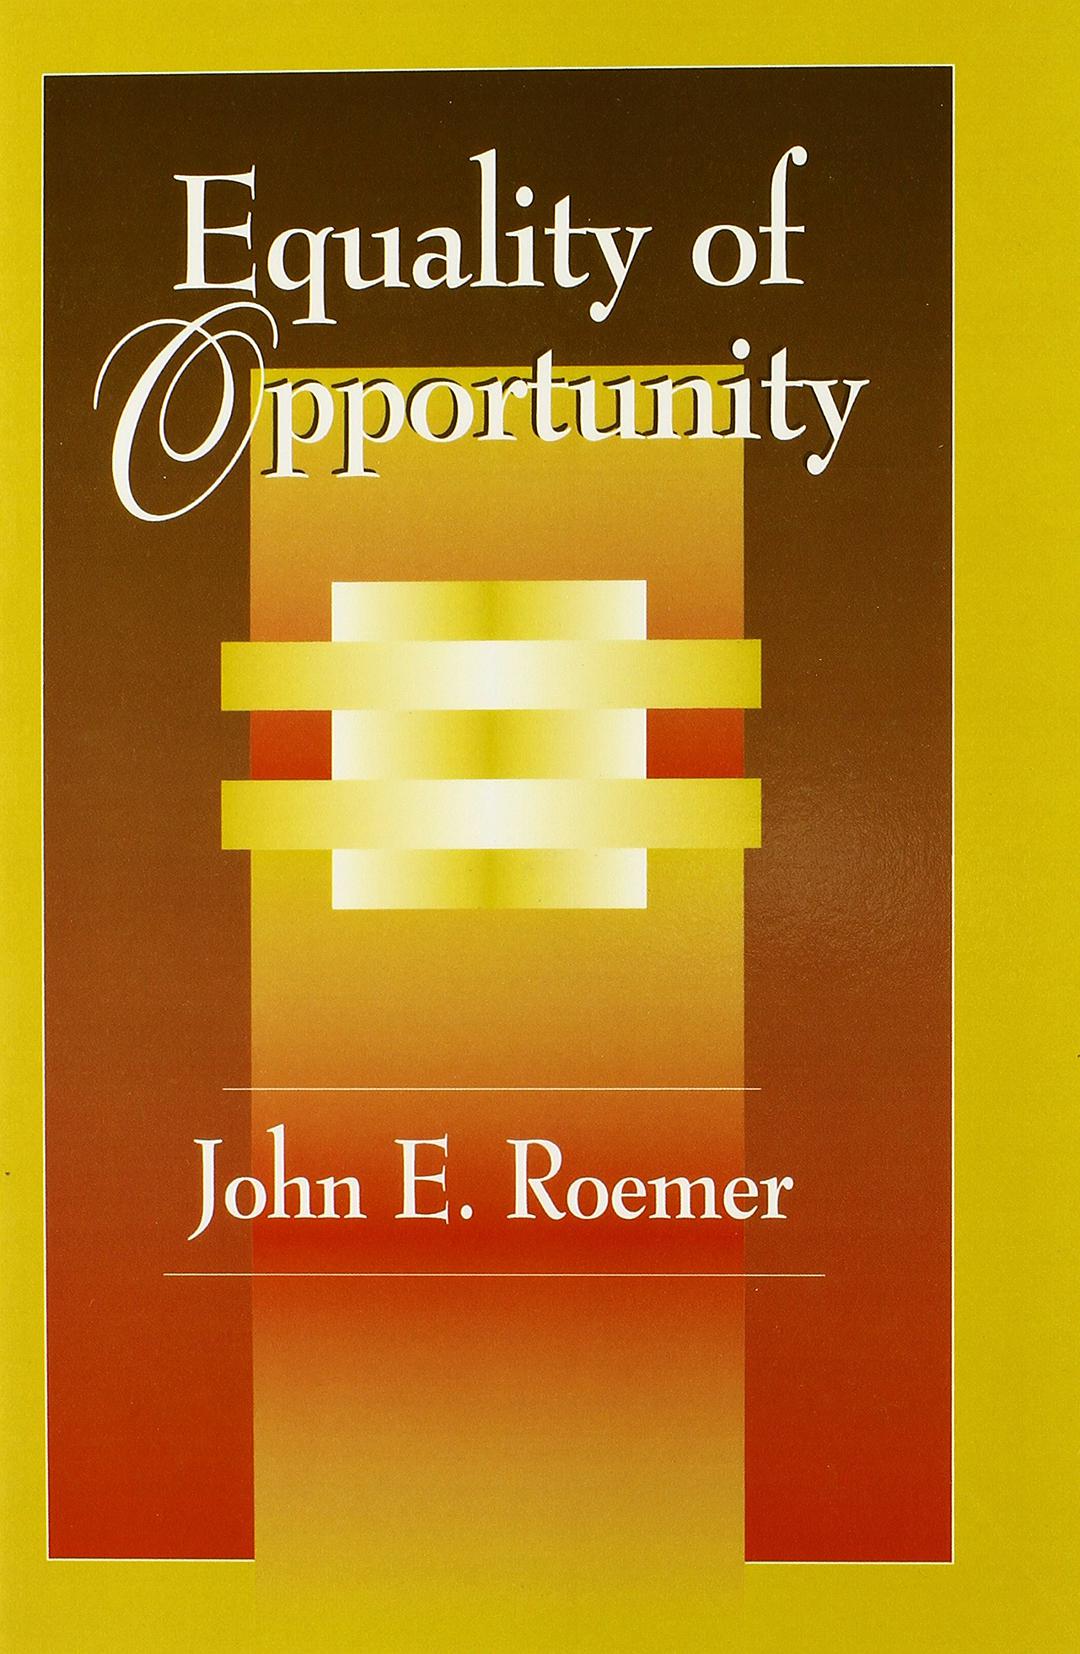 Equality of opportunity